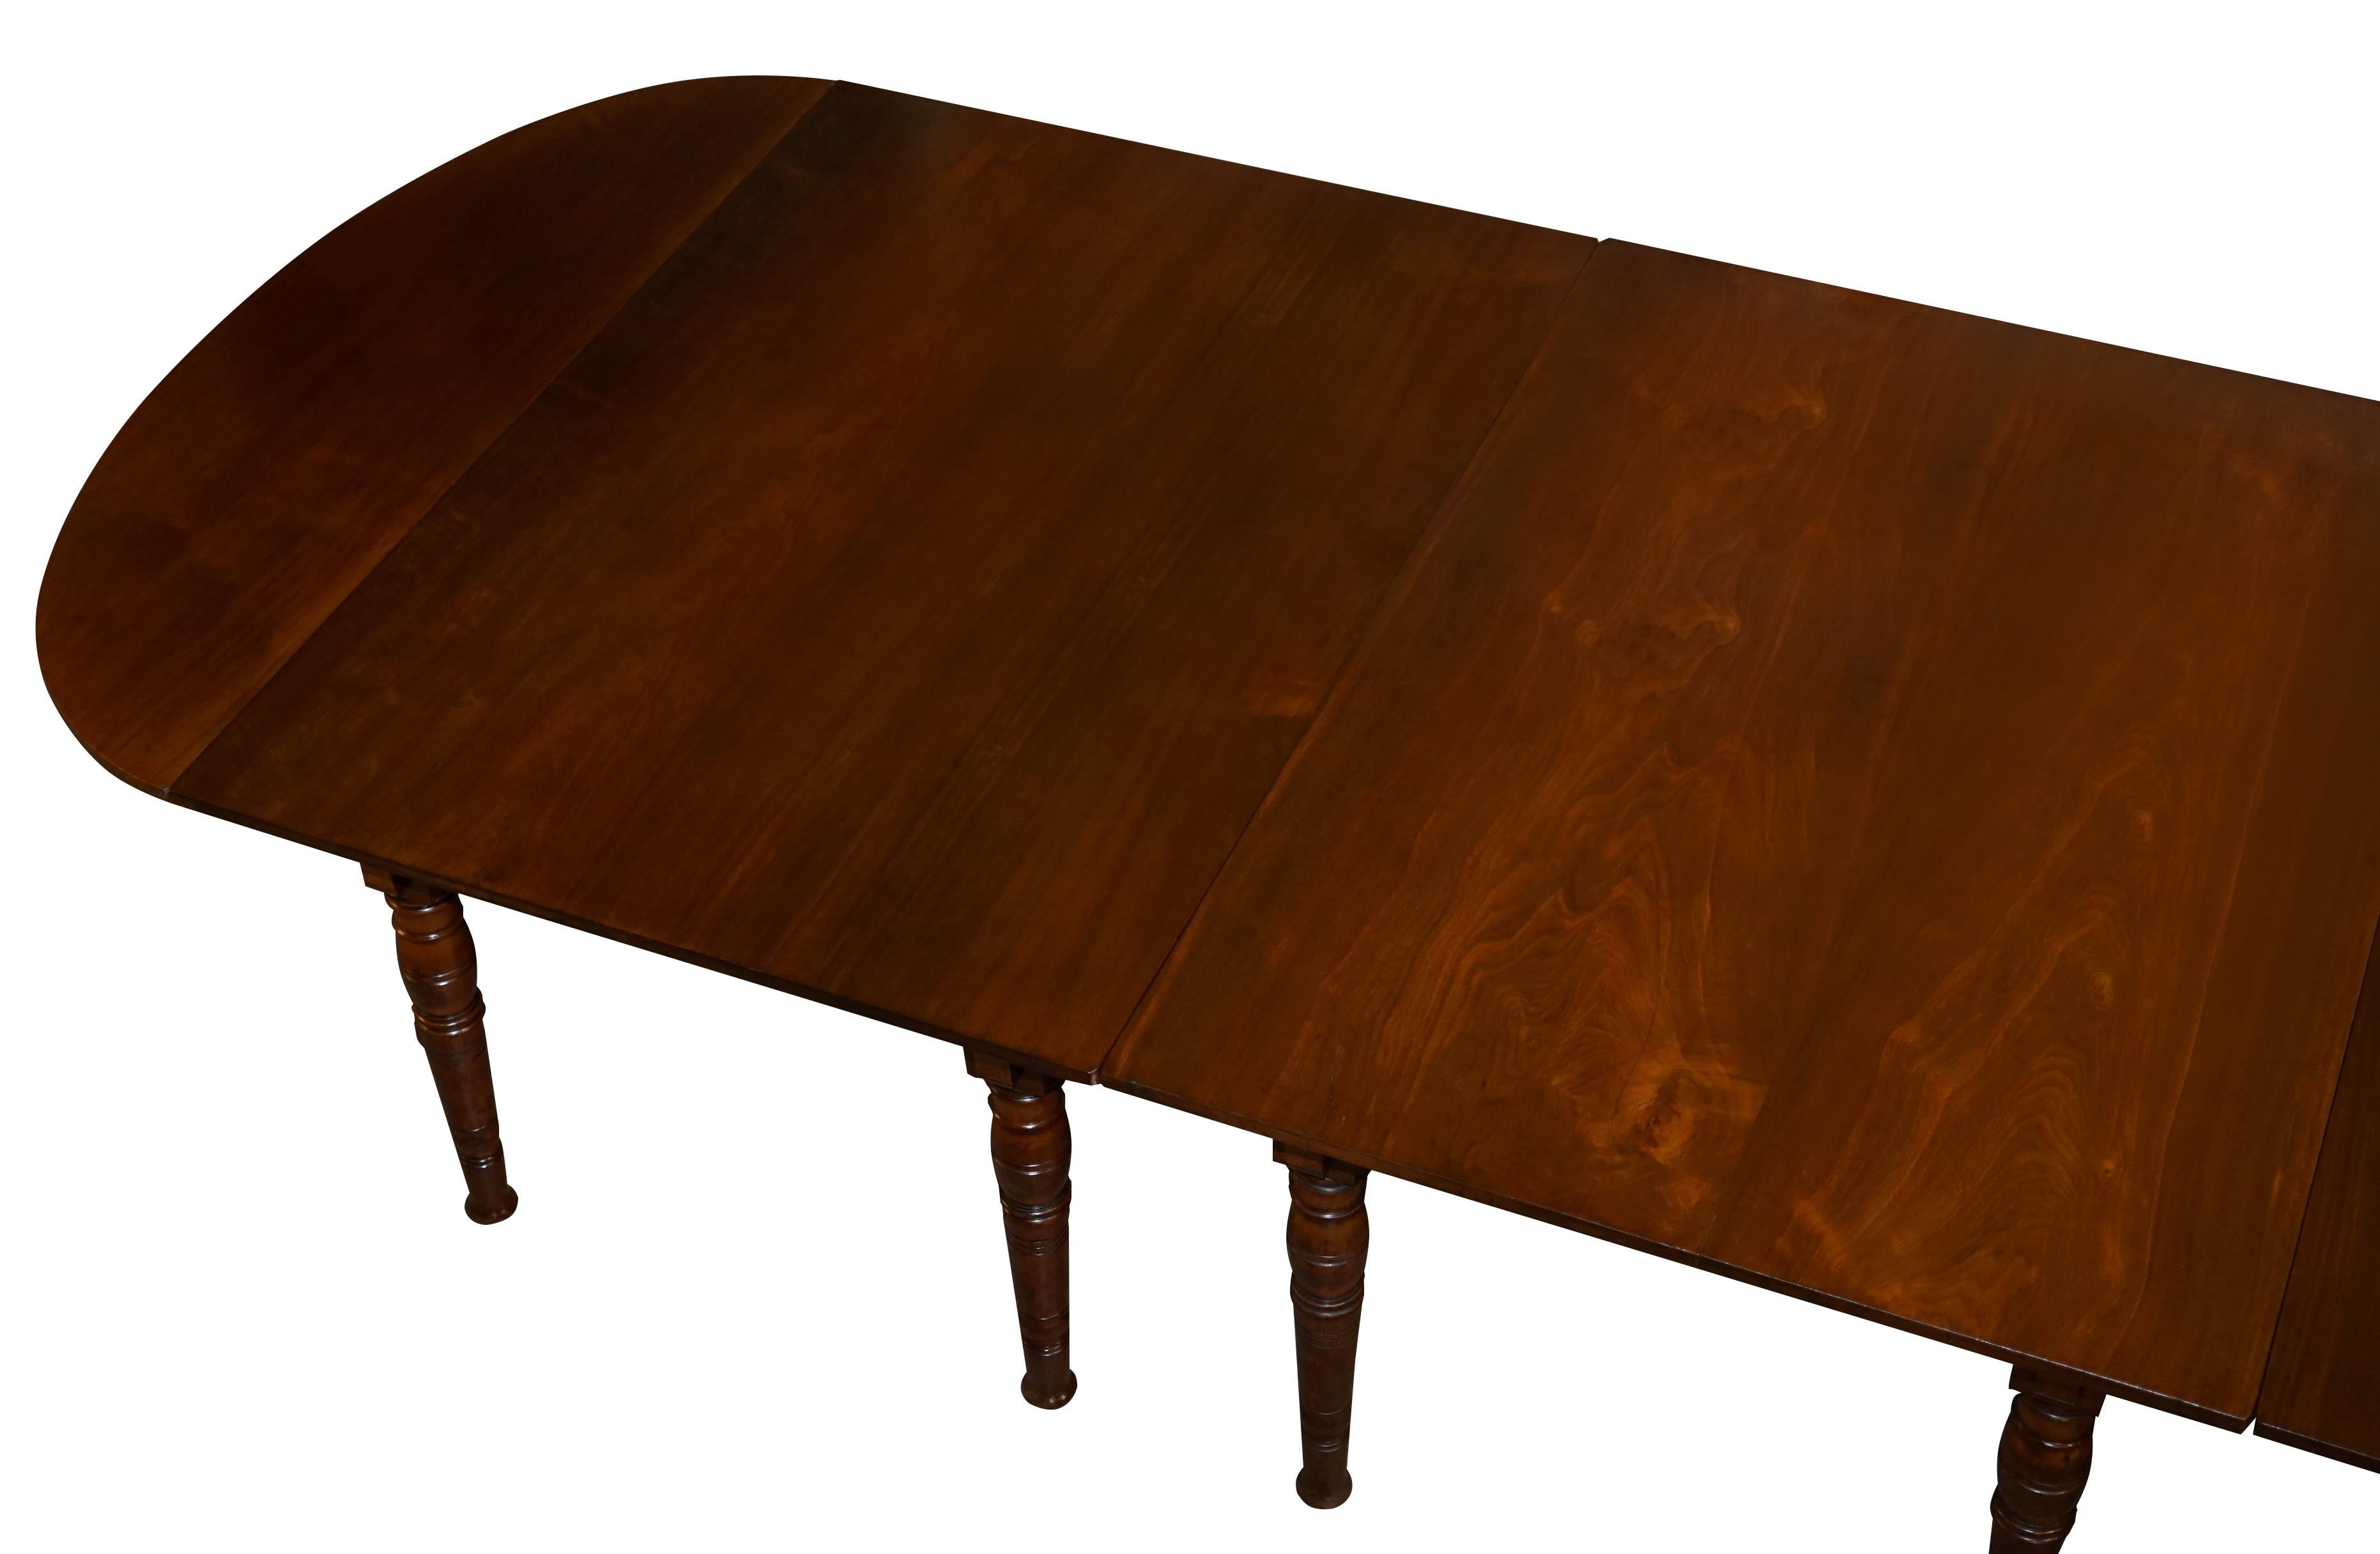 Rare Gillows Lancaster 1789-1795 George III American Walnut Dining Table For Sale 5